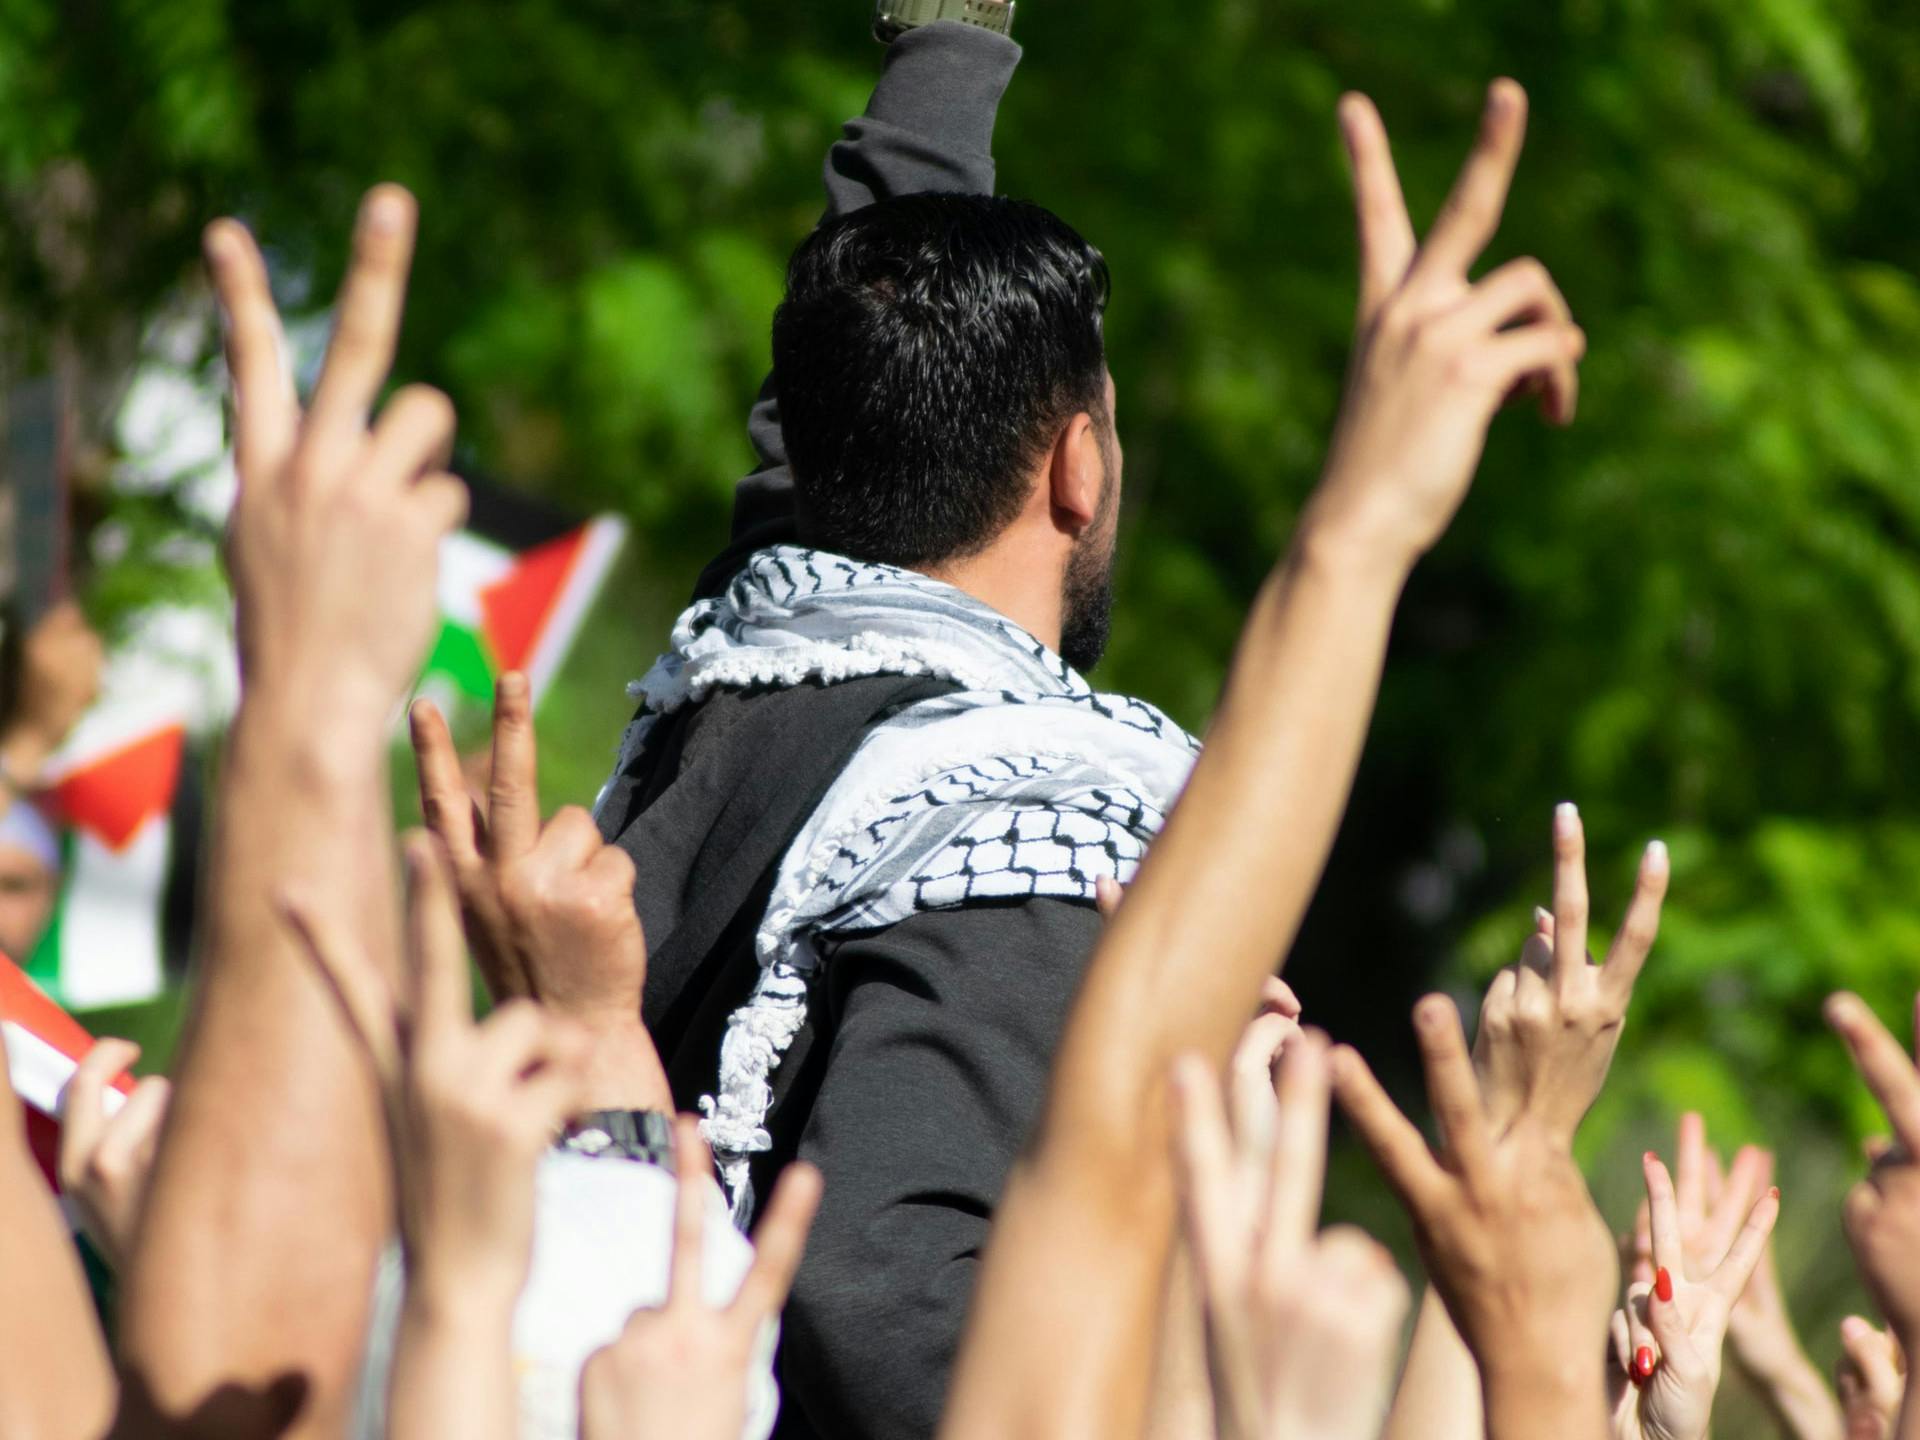 People in Tunis raising their hands at a solidarity demonstration for Palestinians.